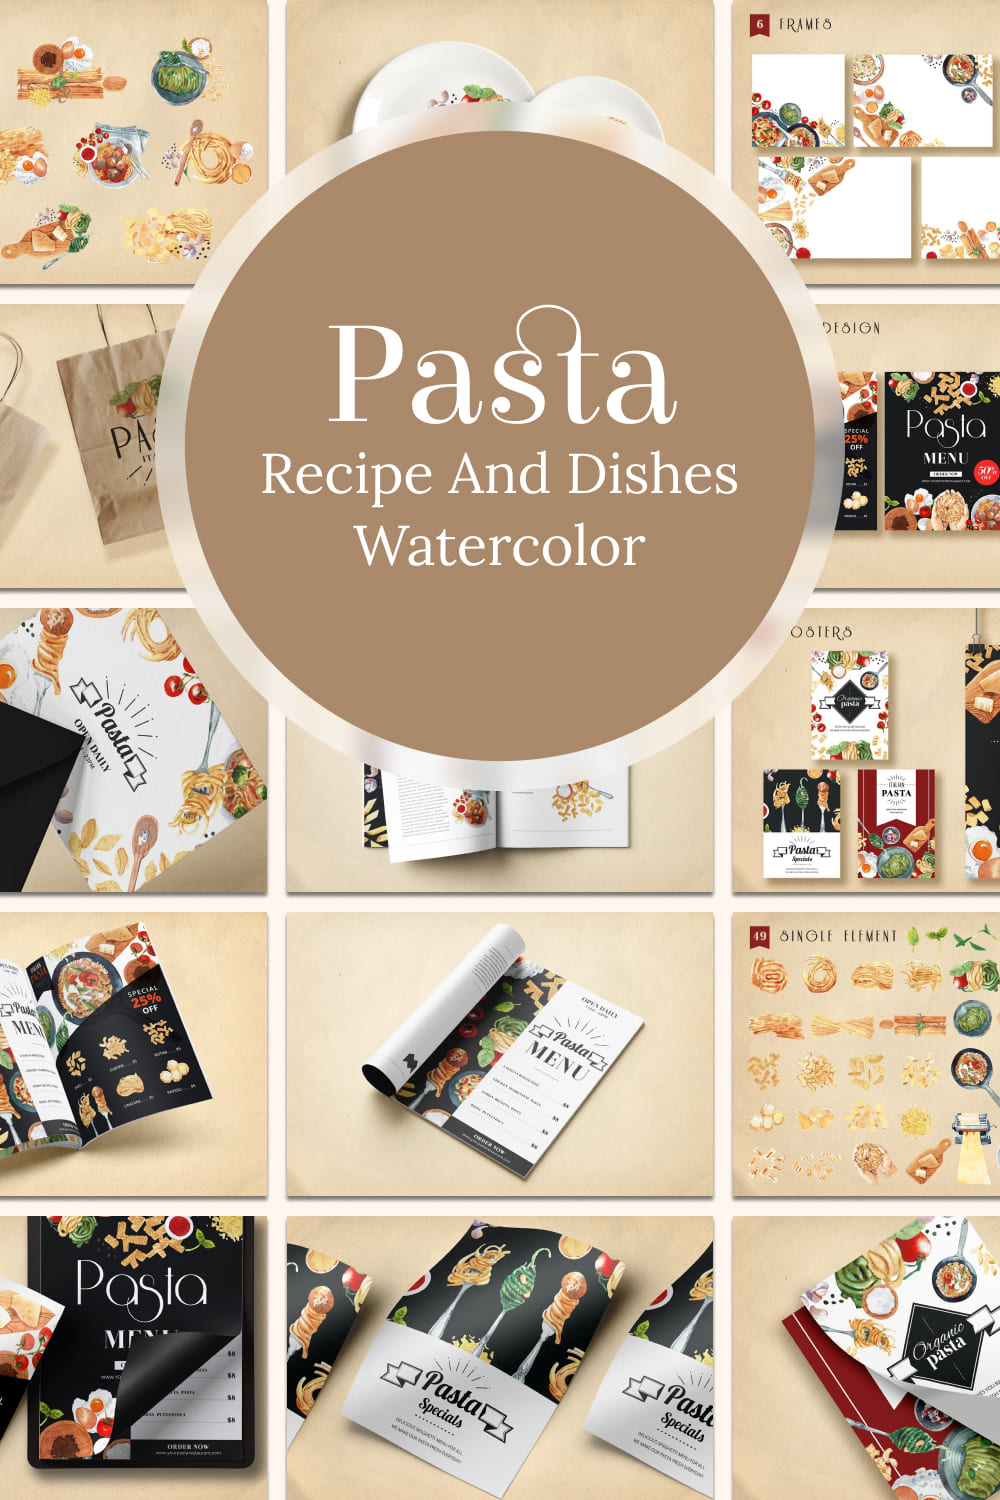 Pasta recipe and dishes watercolor - pinterest image preview.